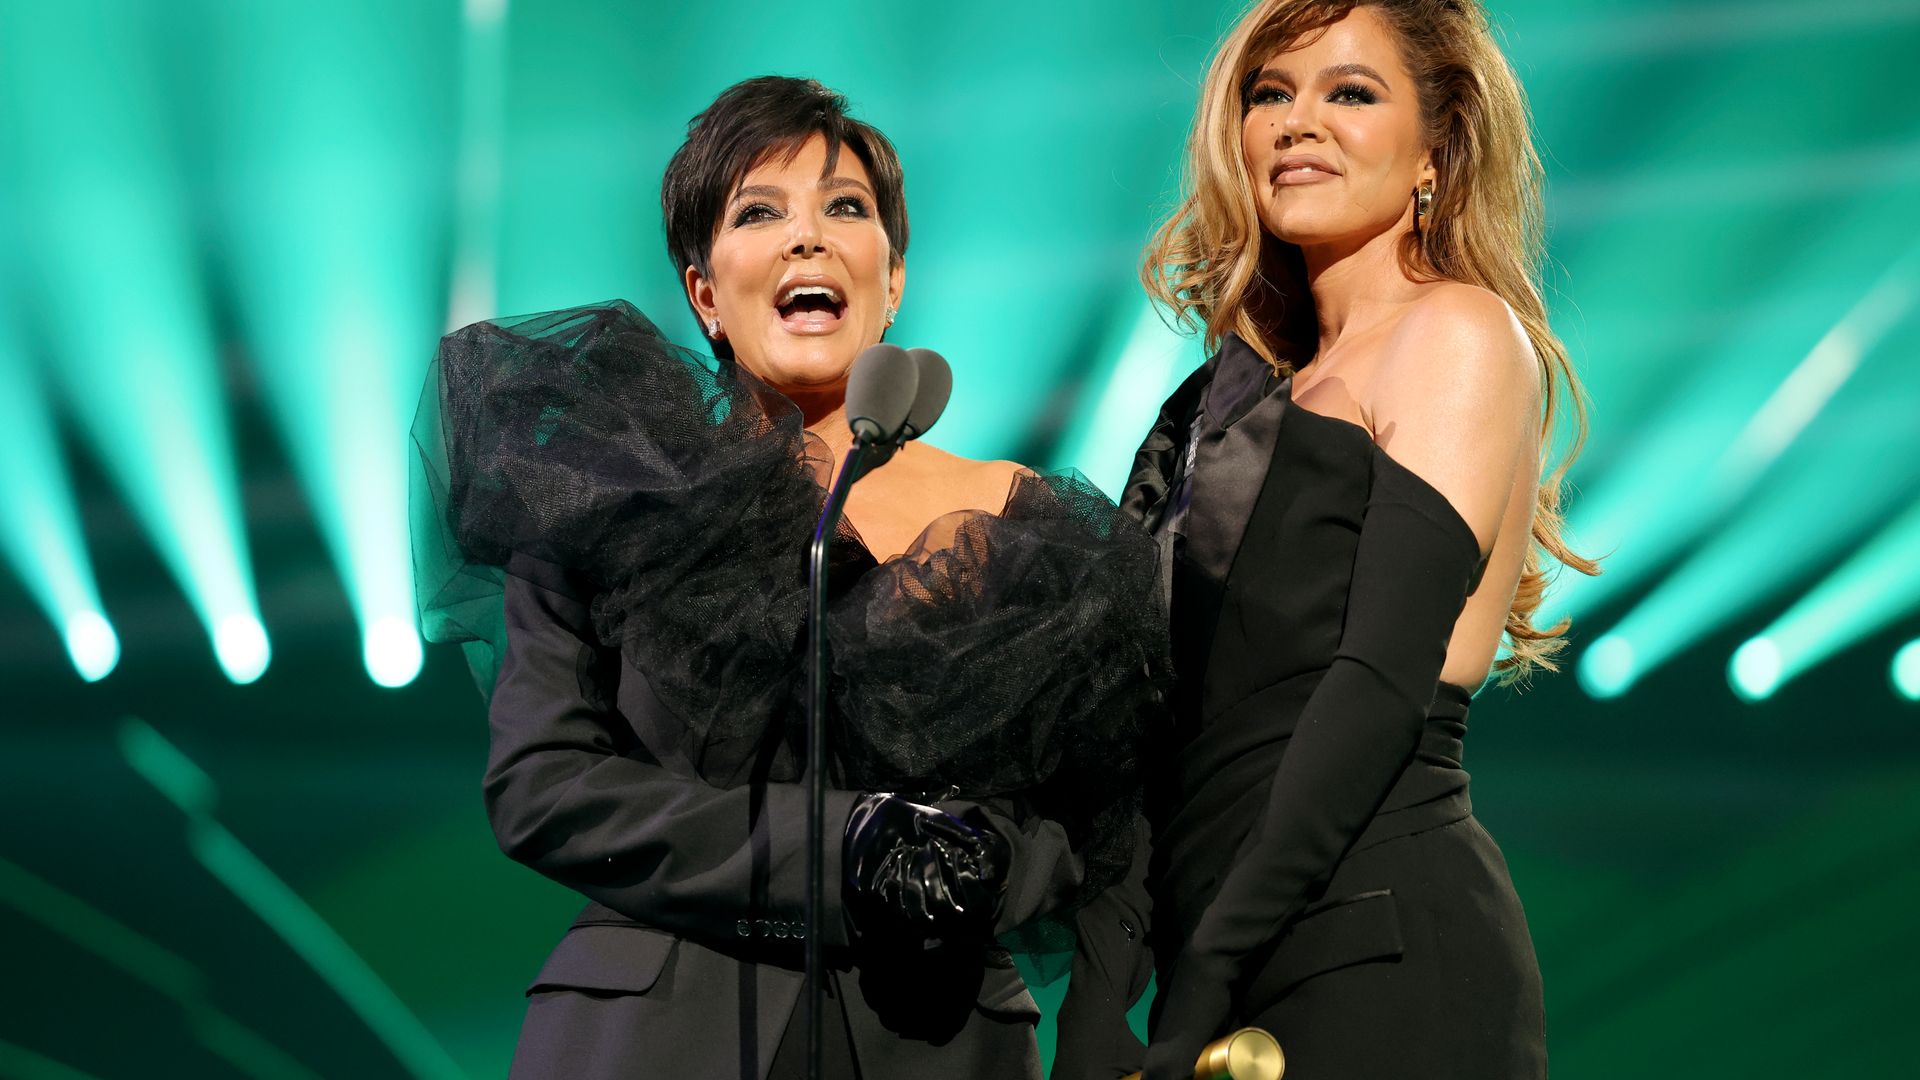 Fans mistake Khloé Kardashian for this iconic star in Kris Jenner's unusual snaps - see photos